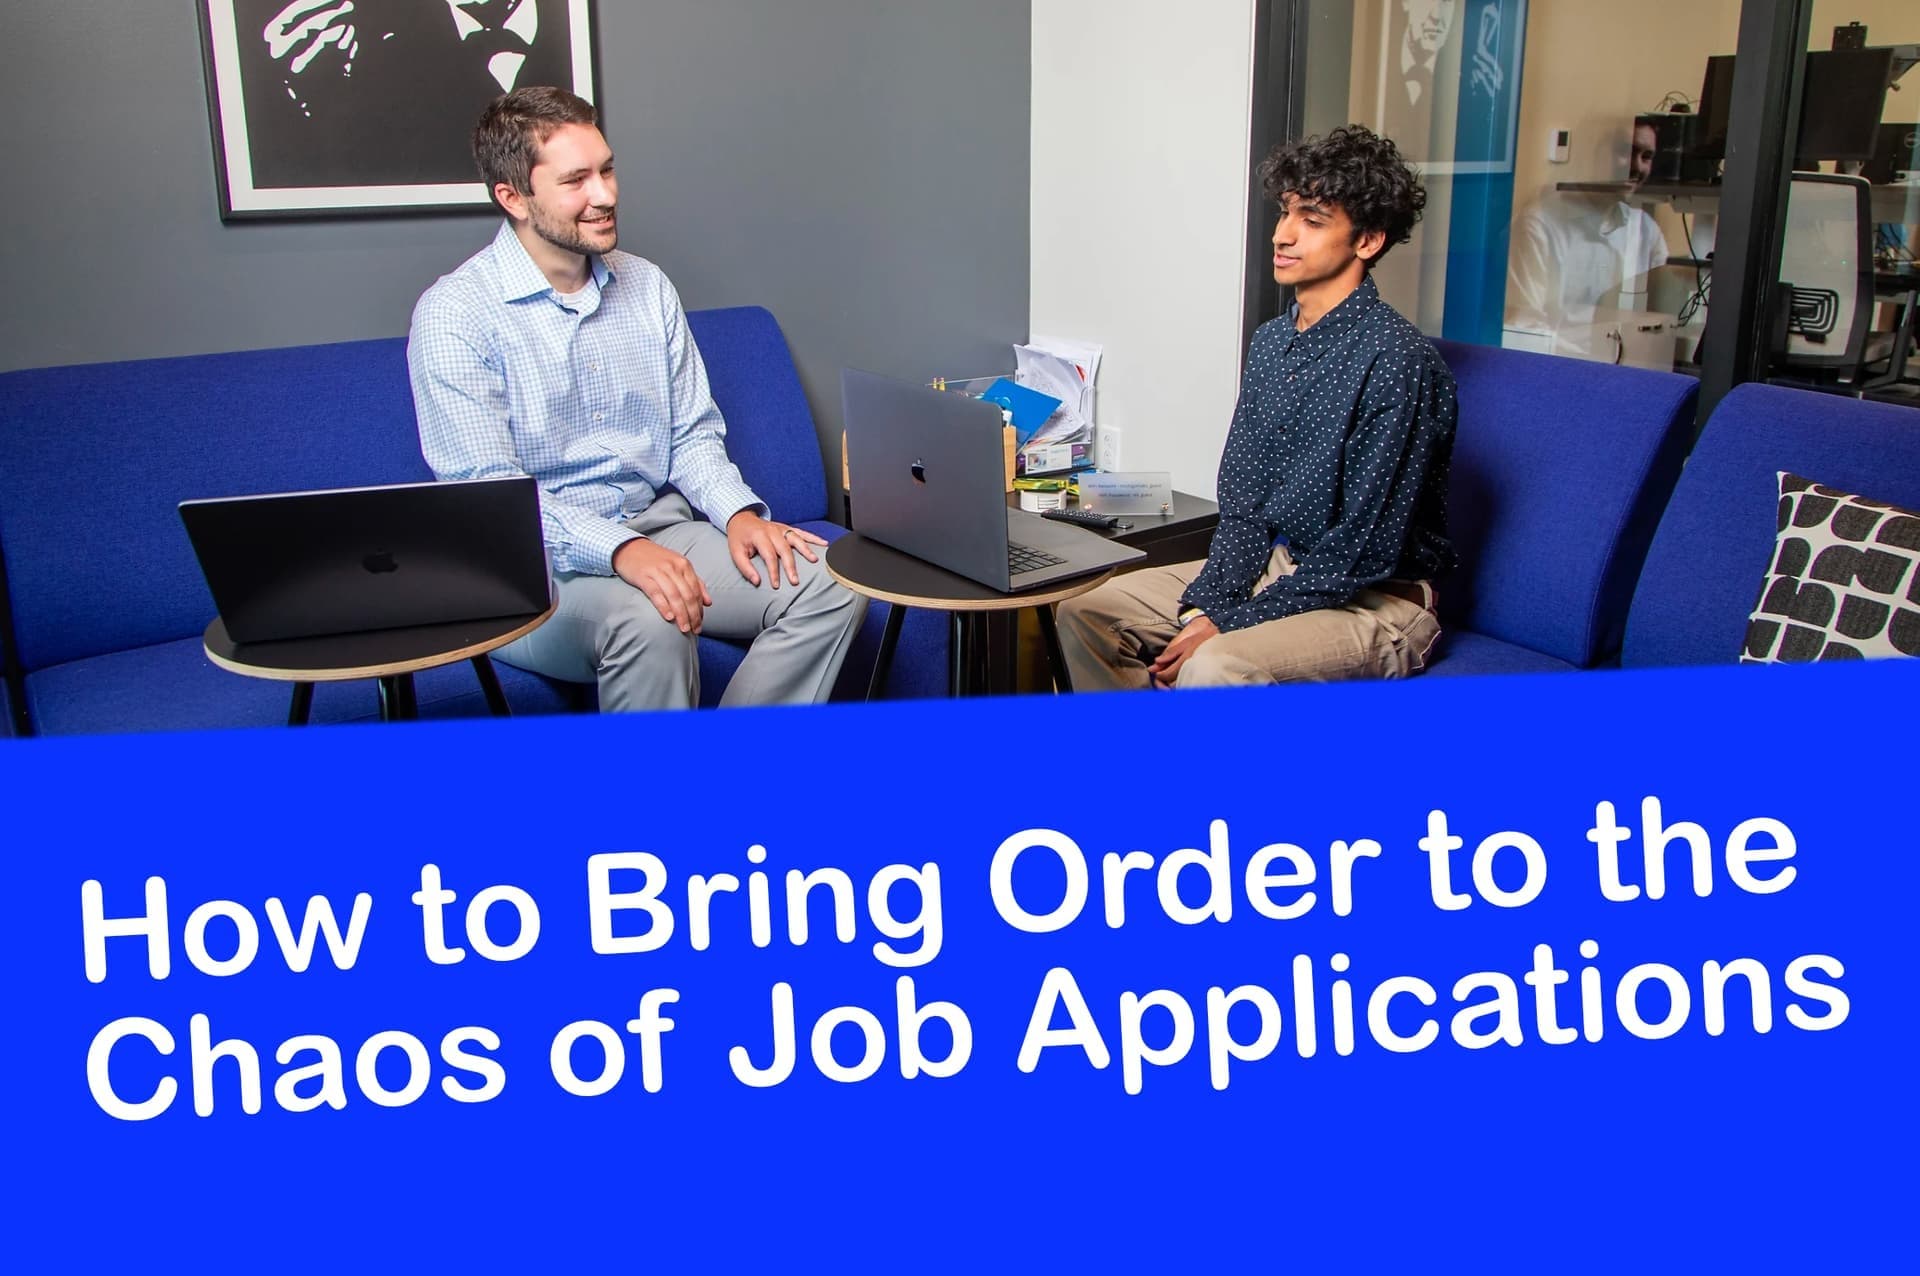 How to Bring Order to the Chaos of Job Applications